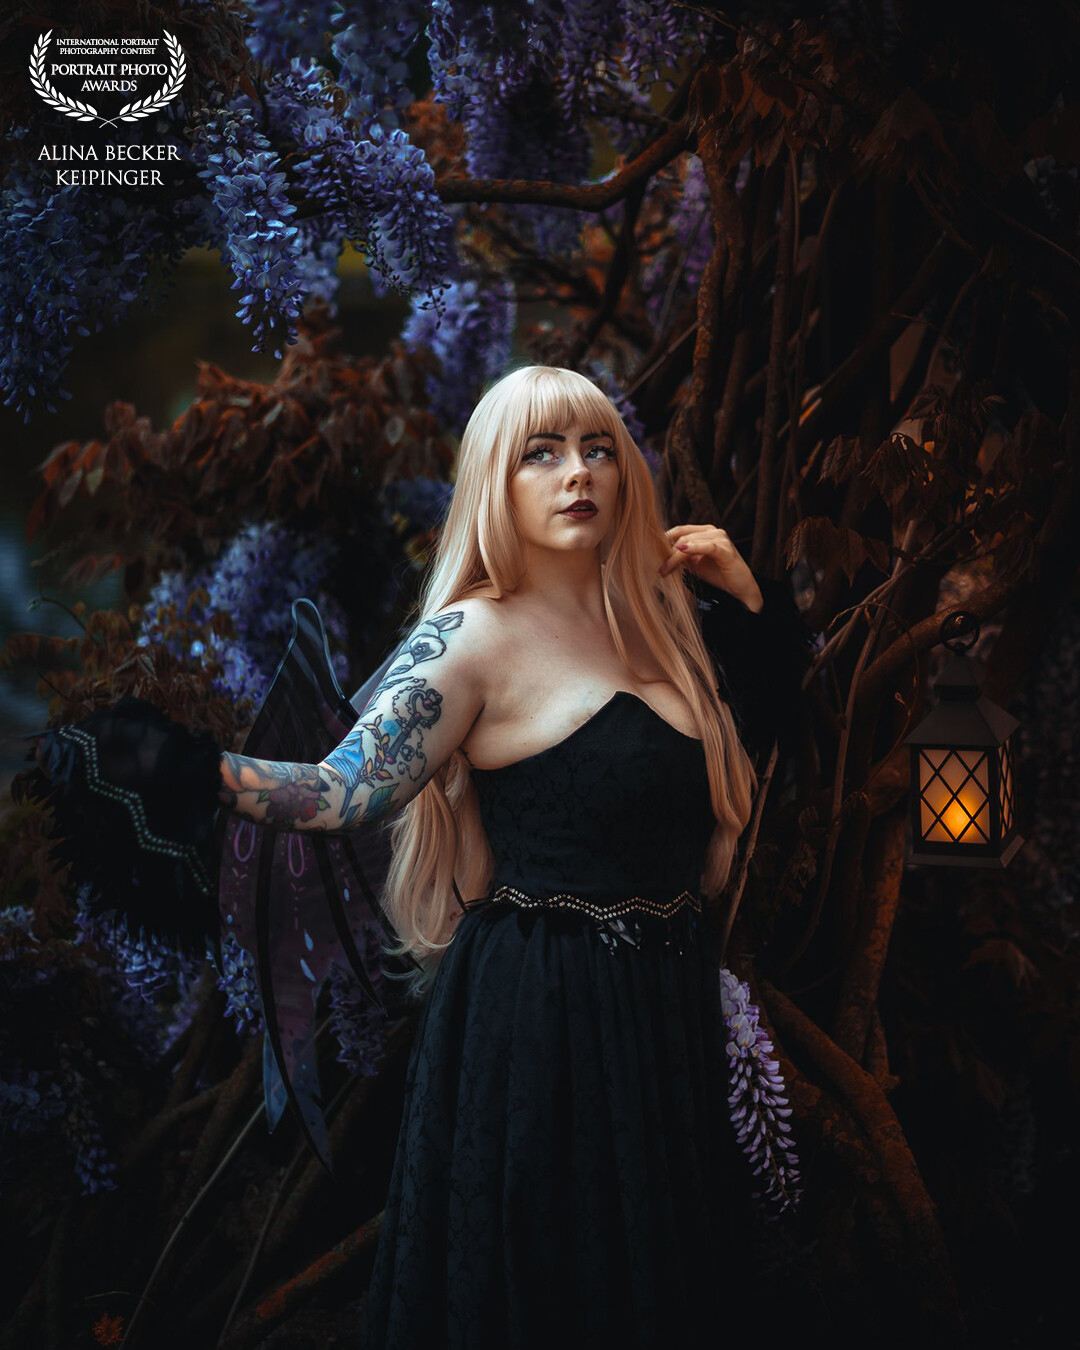 This incredible Dress is from silvermoon Threads ♥️ Together with Bunny_tsukino i did an amazingg outdoor shoot and edited this Picture nightlike - i only used Lightroom for this result 🫶